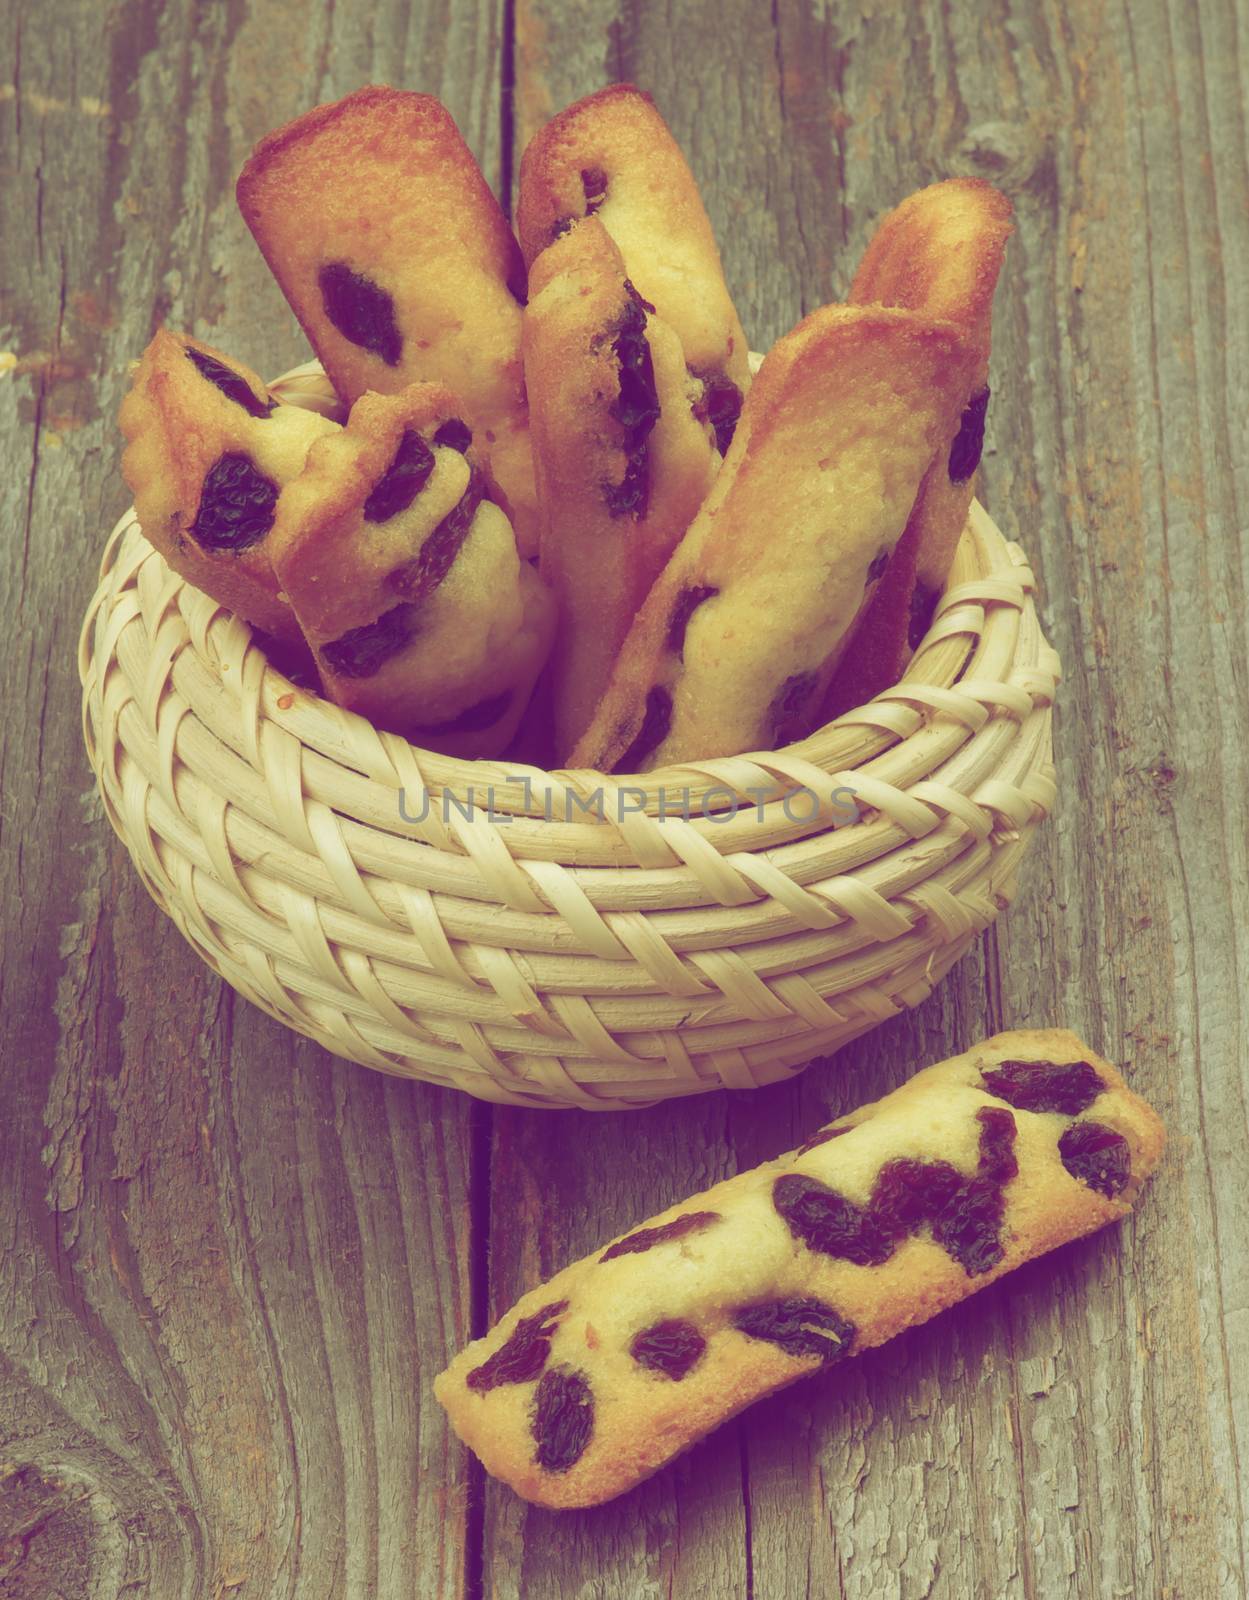 Tasty Biscuit Raisin Cookies in Wicker Bowl closeup on Rustic Wooden background. Retro Styled